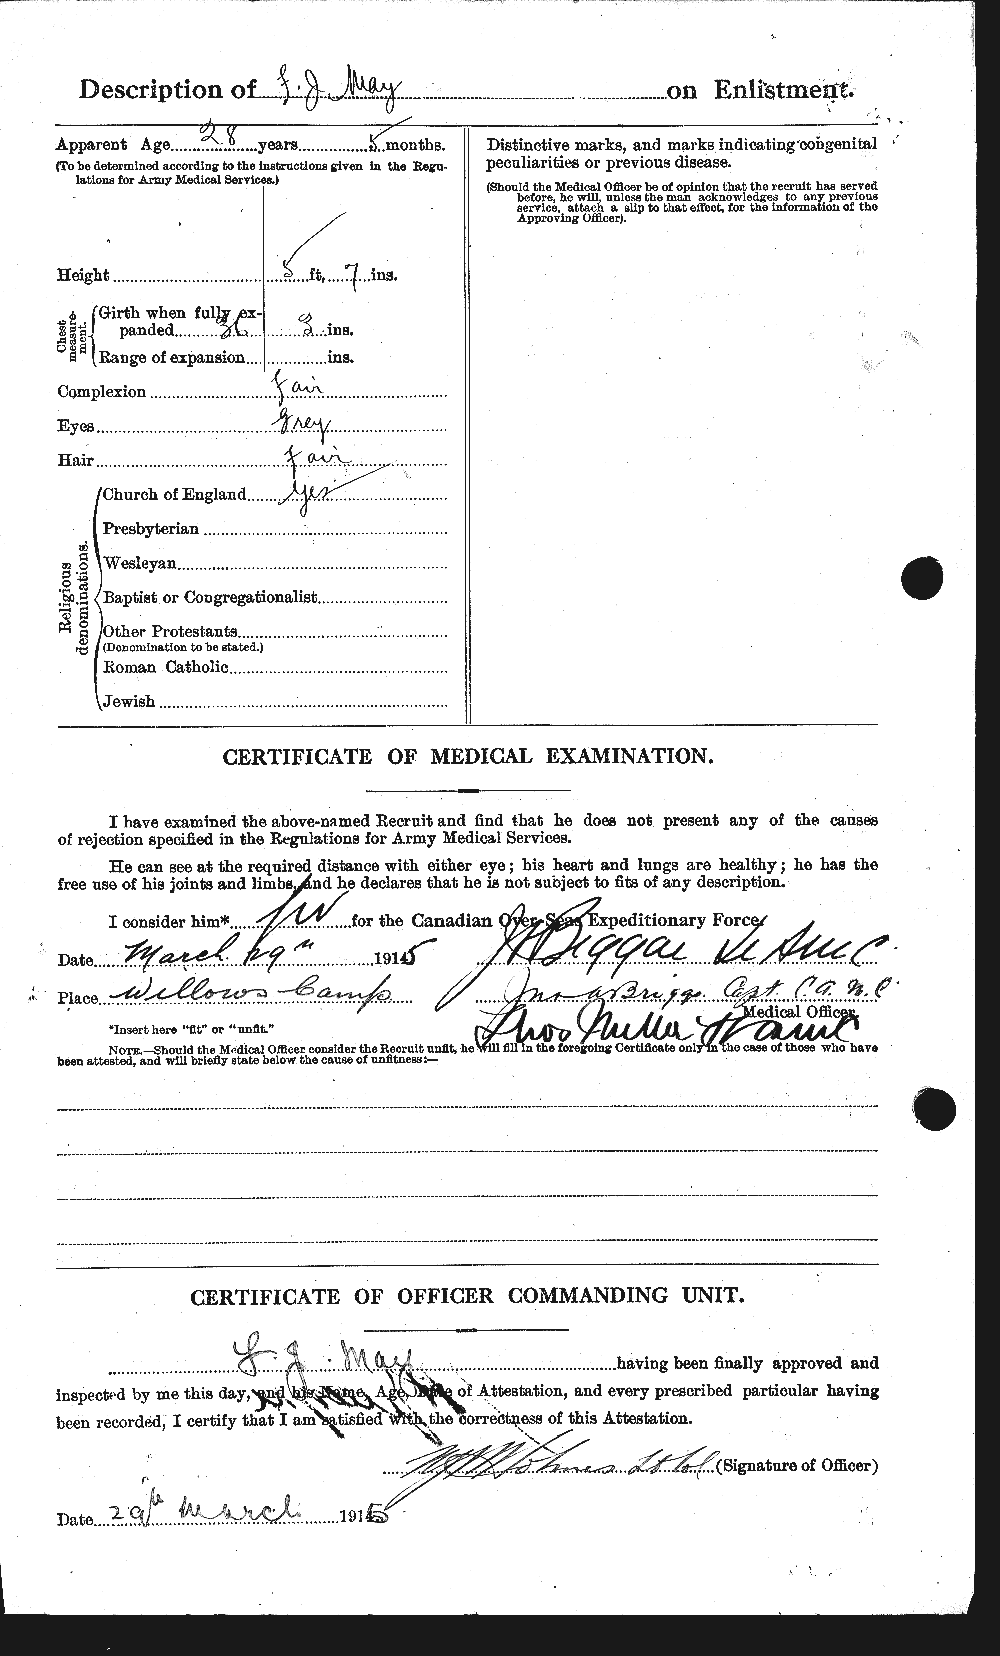 Personnel Records of the First World War - CEF 492136b